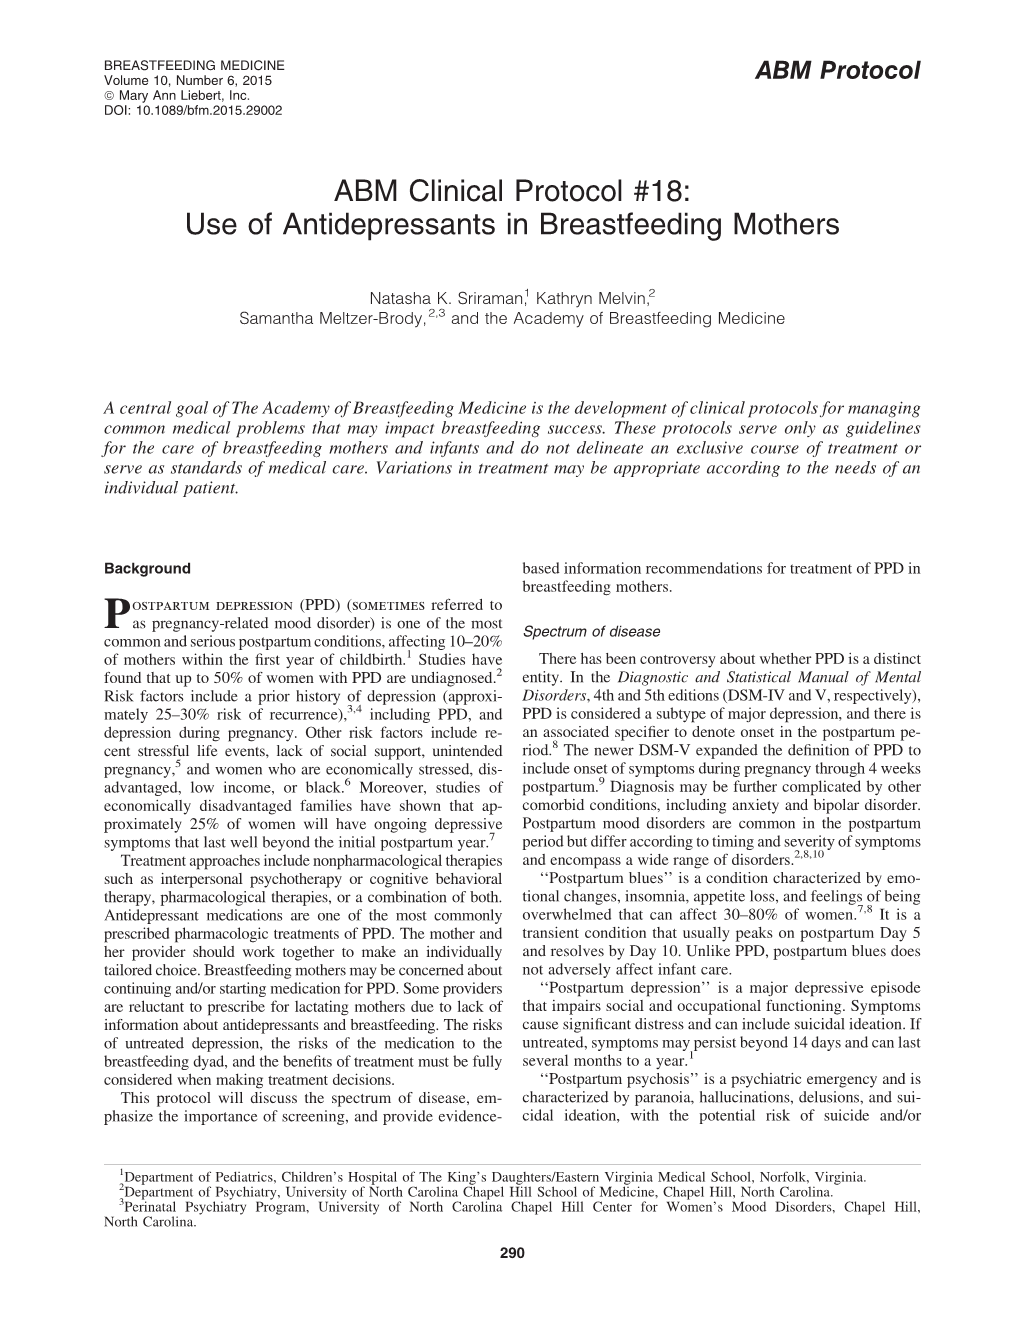 ABM Clinical Protocol #18: Use of Antidepressants in Breastfeeding Mothers